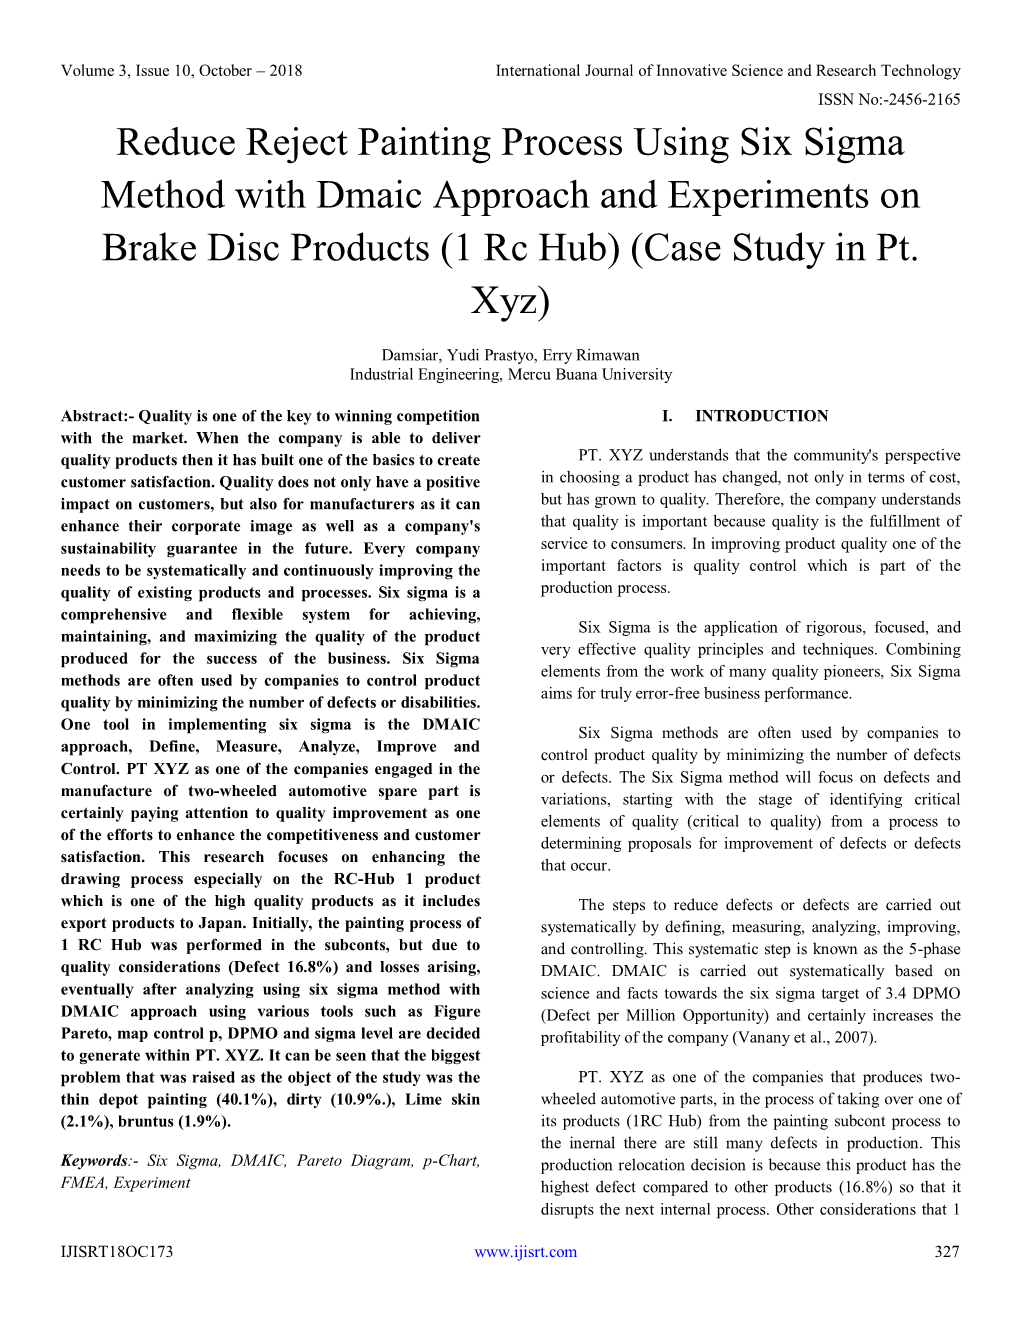 Reduce Reject Painting Process Using Six Sigma Method with Dmaic Approach and Experiments on Brake Disc Products (1 Rc Hub) (Case Study in Pt